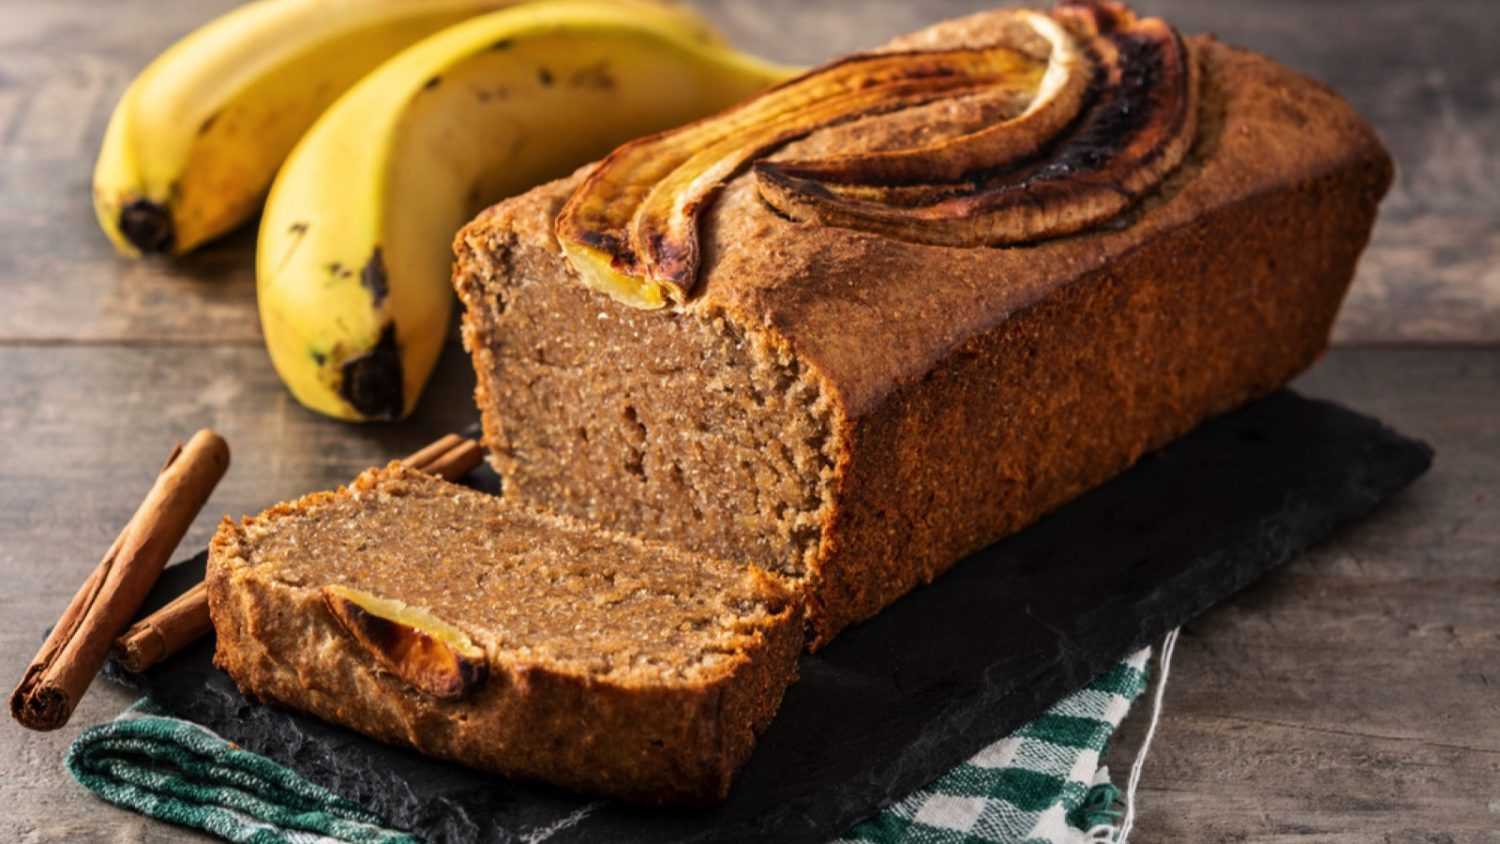 <p>If you aren't fond of store-bought snacks, you can try out one member's approach. They usually make chocolate chip banana bread or pumpkin muffins and try to make sure whatever they bring isn't a prevalent allergen. You don't want to risk a medical emergency on a flight!</p>